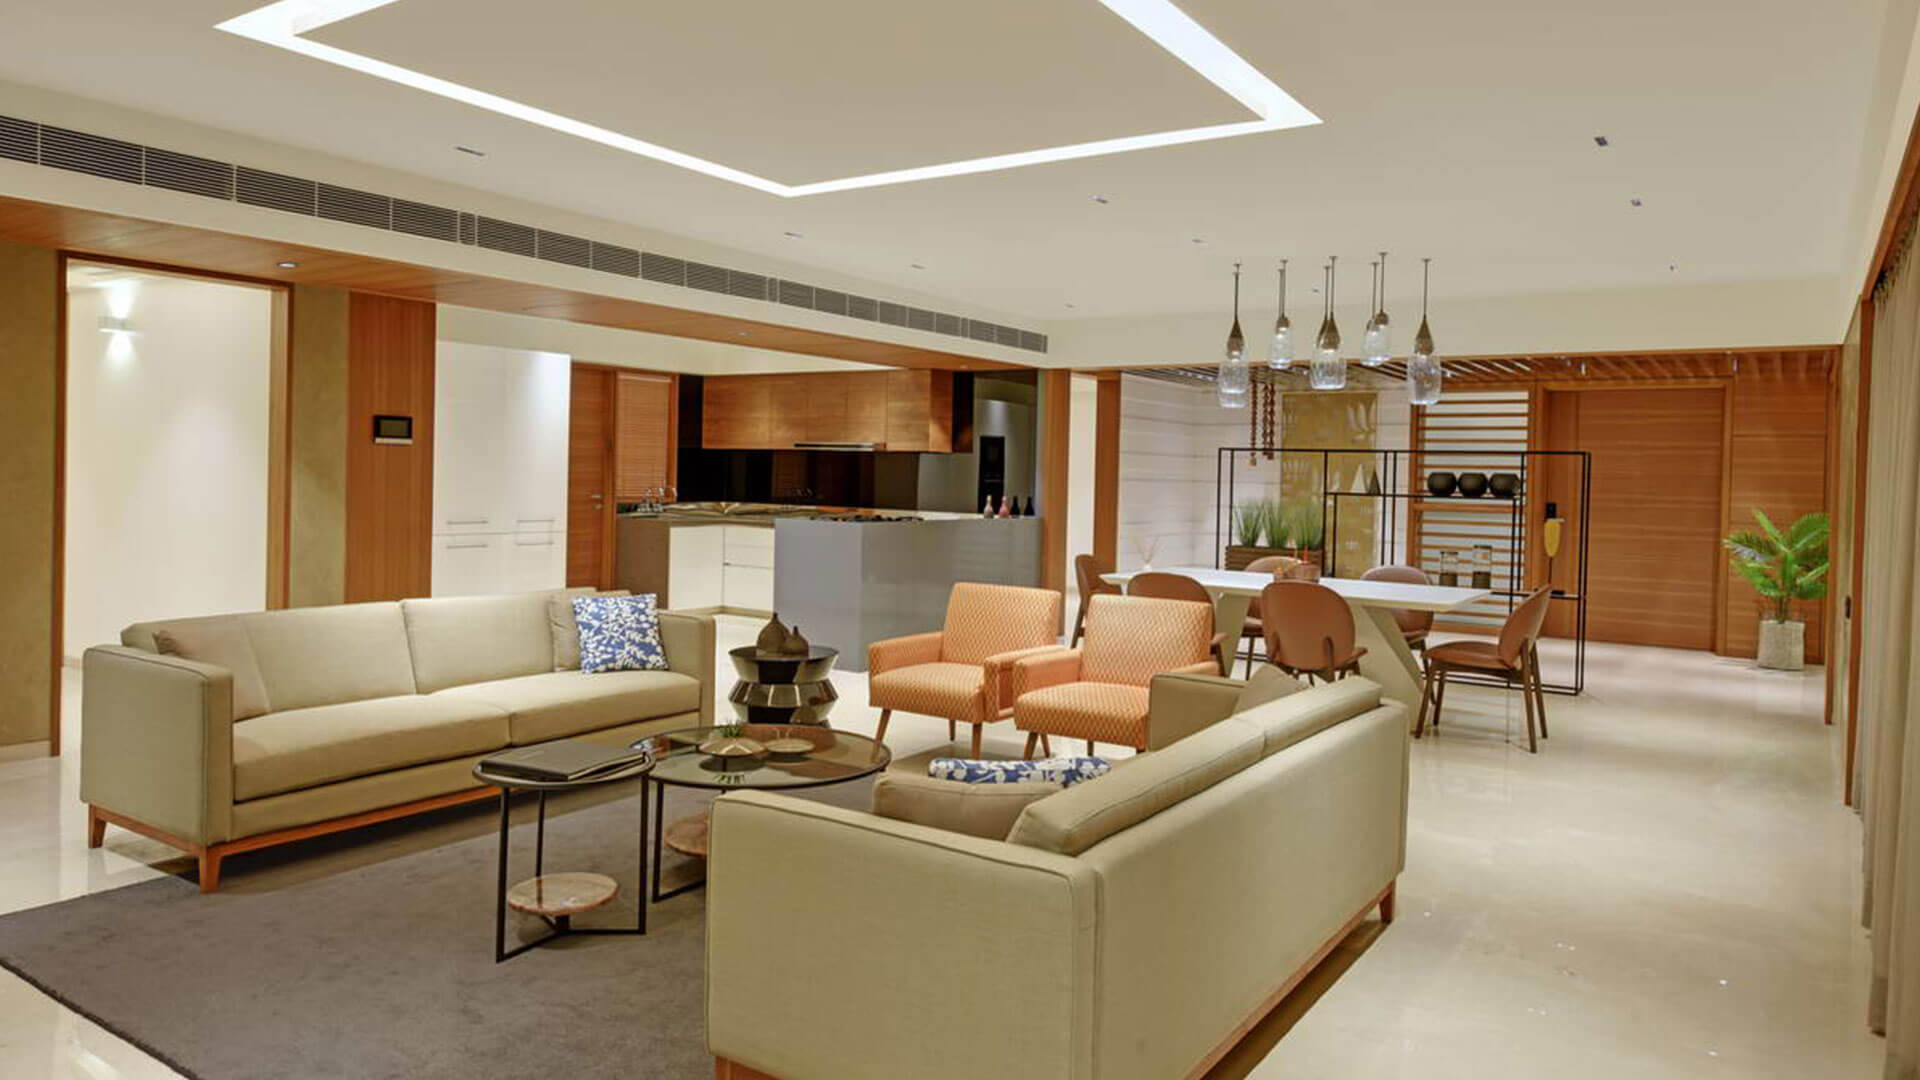 The luxurious interior in the house of Arista Buildcon-Eminence24